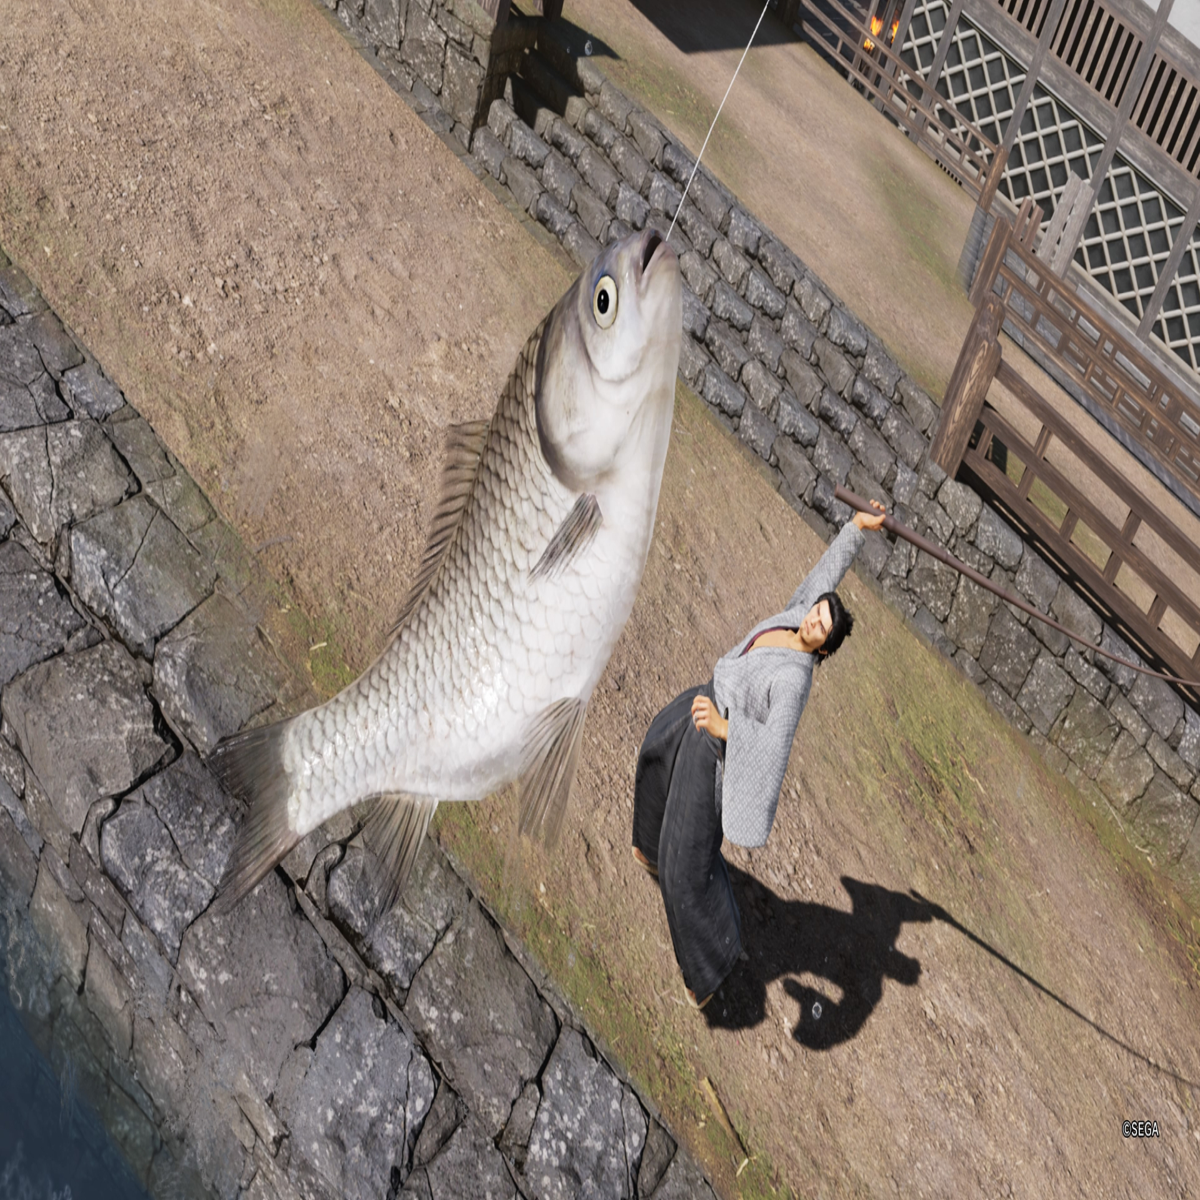 MOD RELEASE] NEW FISH SELECTION SCREEN